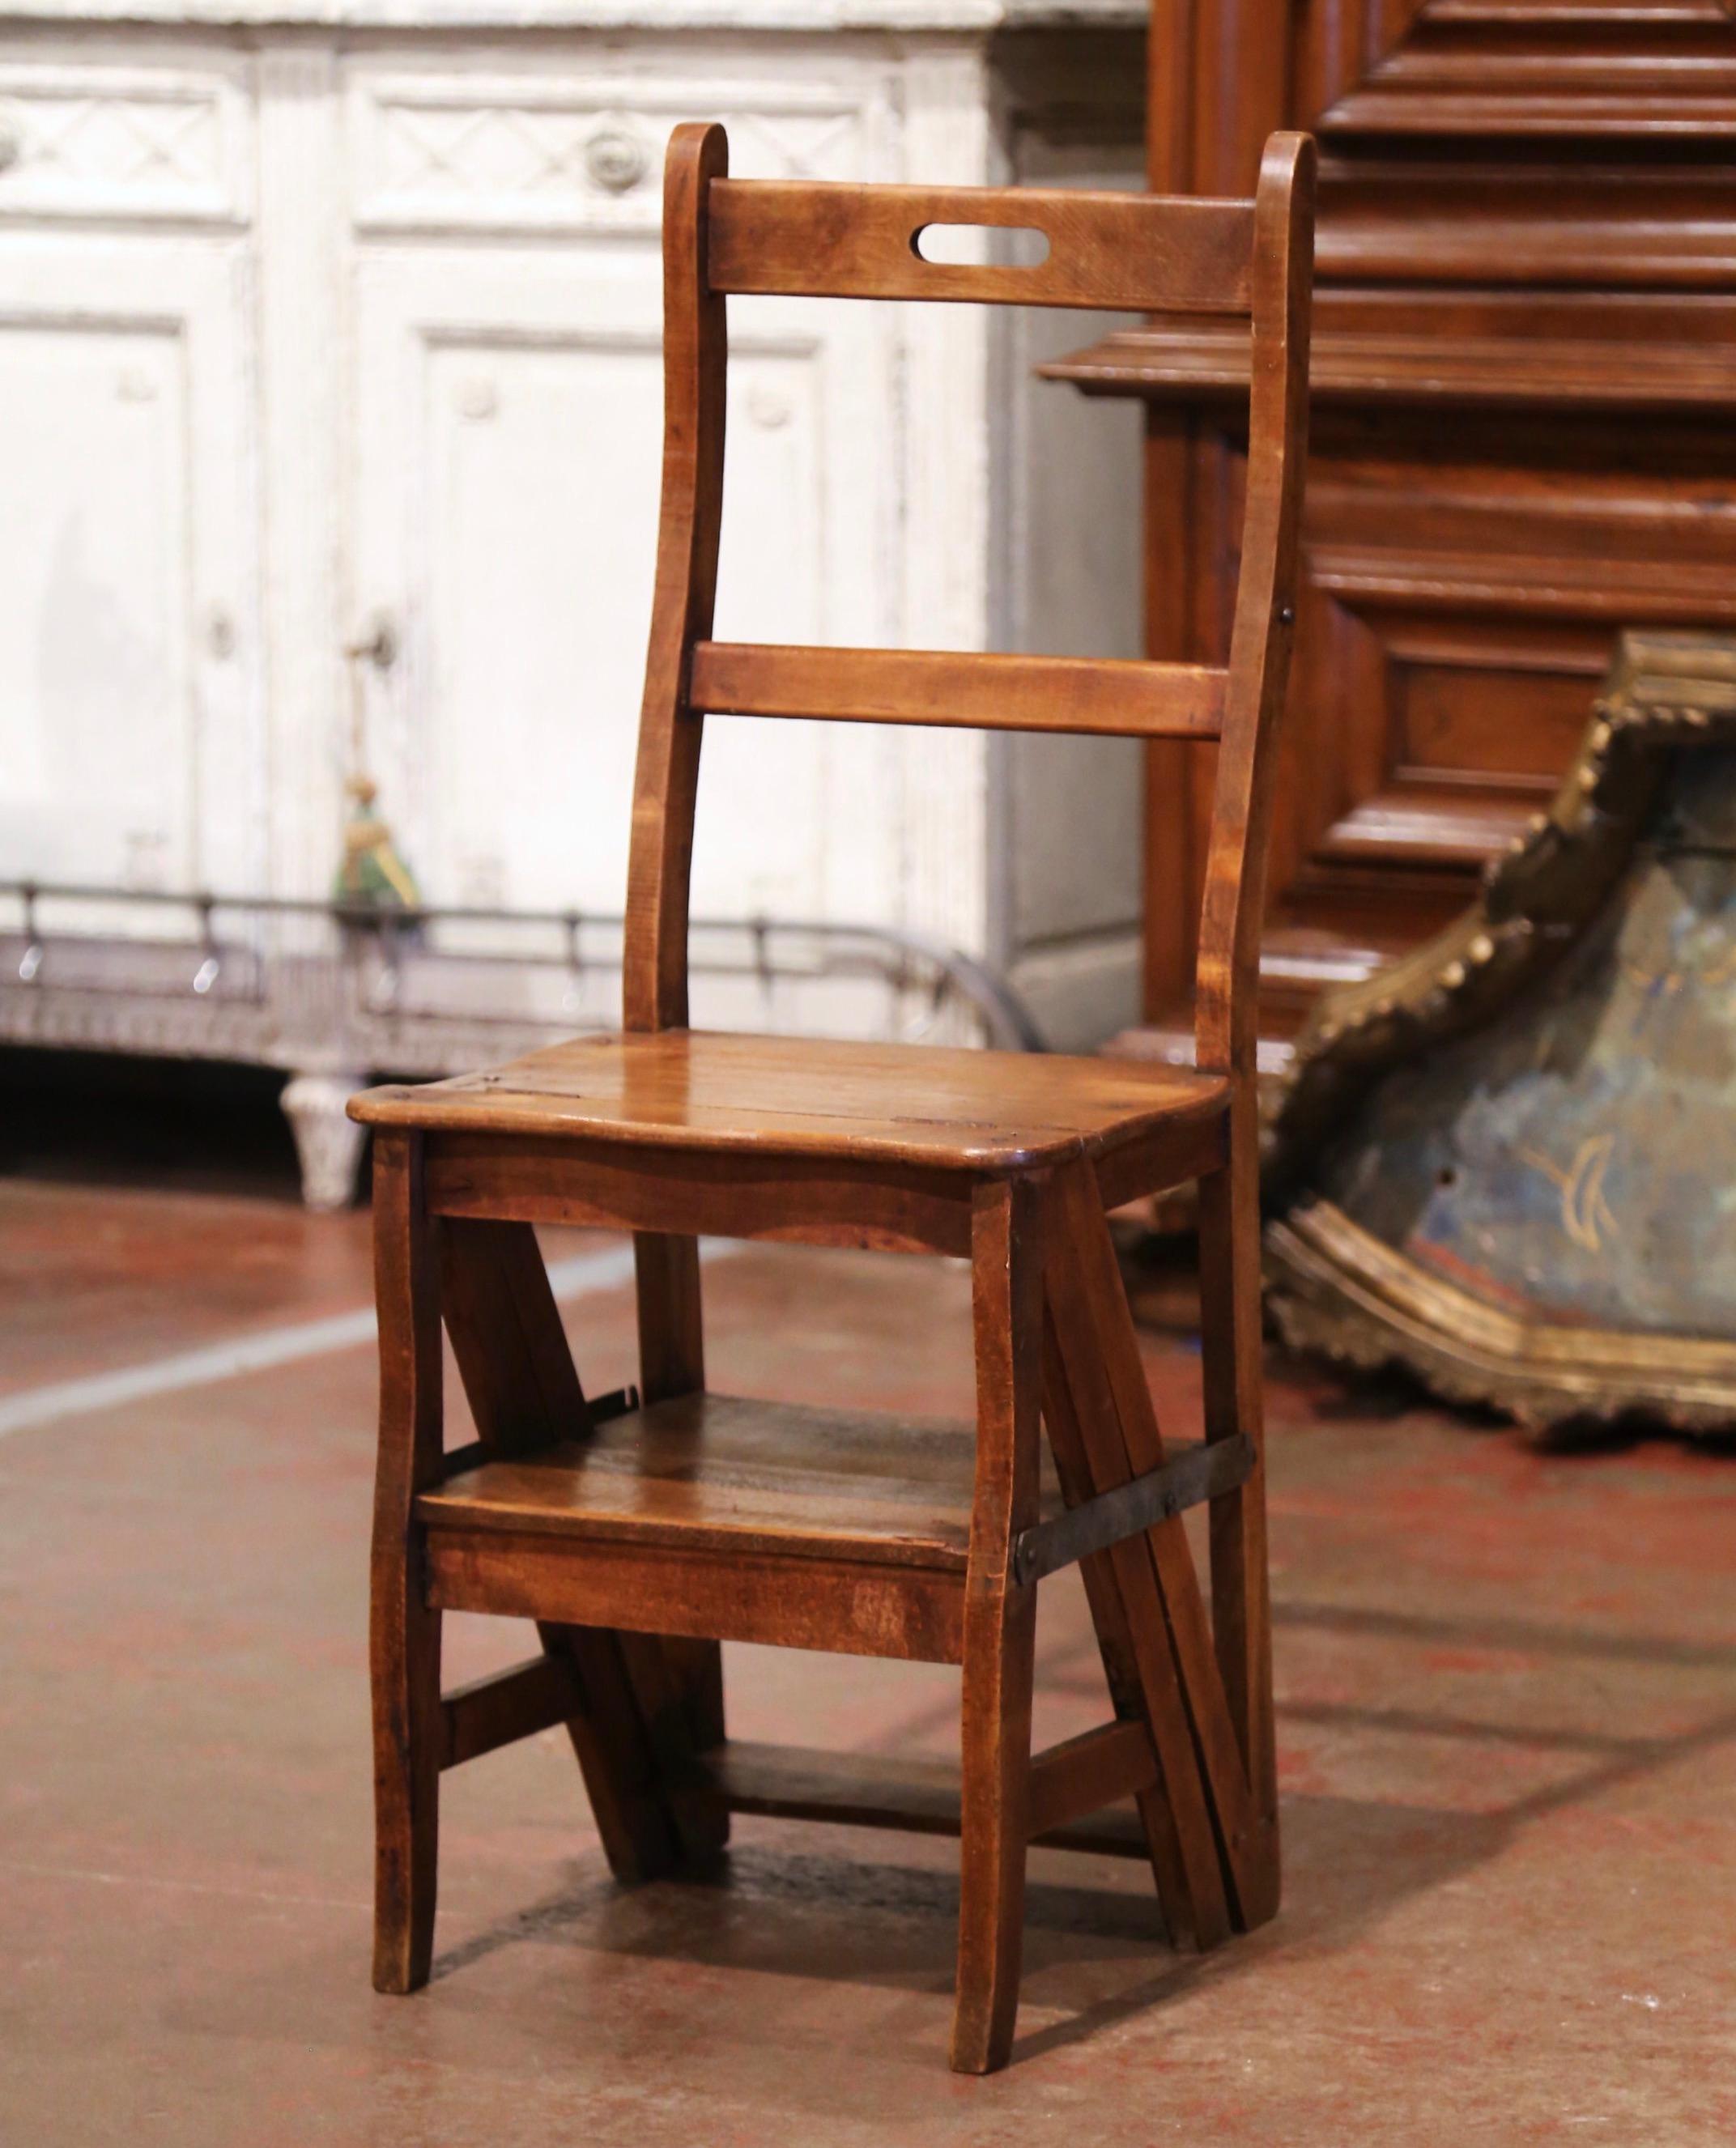 Decorate a library or study with this artisan-made folding step ladder chair. Crafted in Southern France circa 1880, the metamorphic chair features two carved ladders in the back with a handle for easy handle; the double-function piece is hinged so